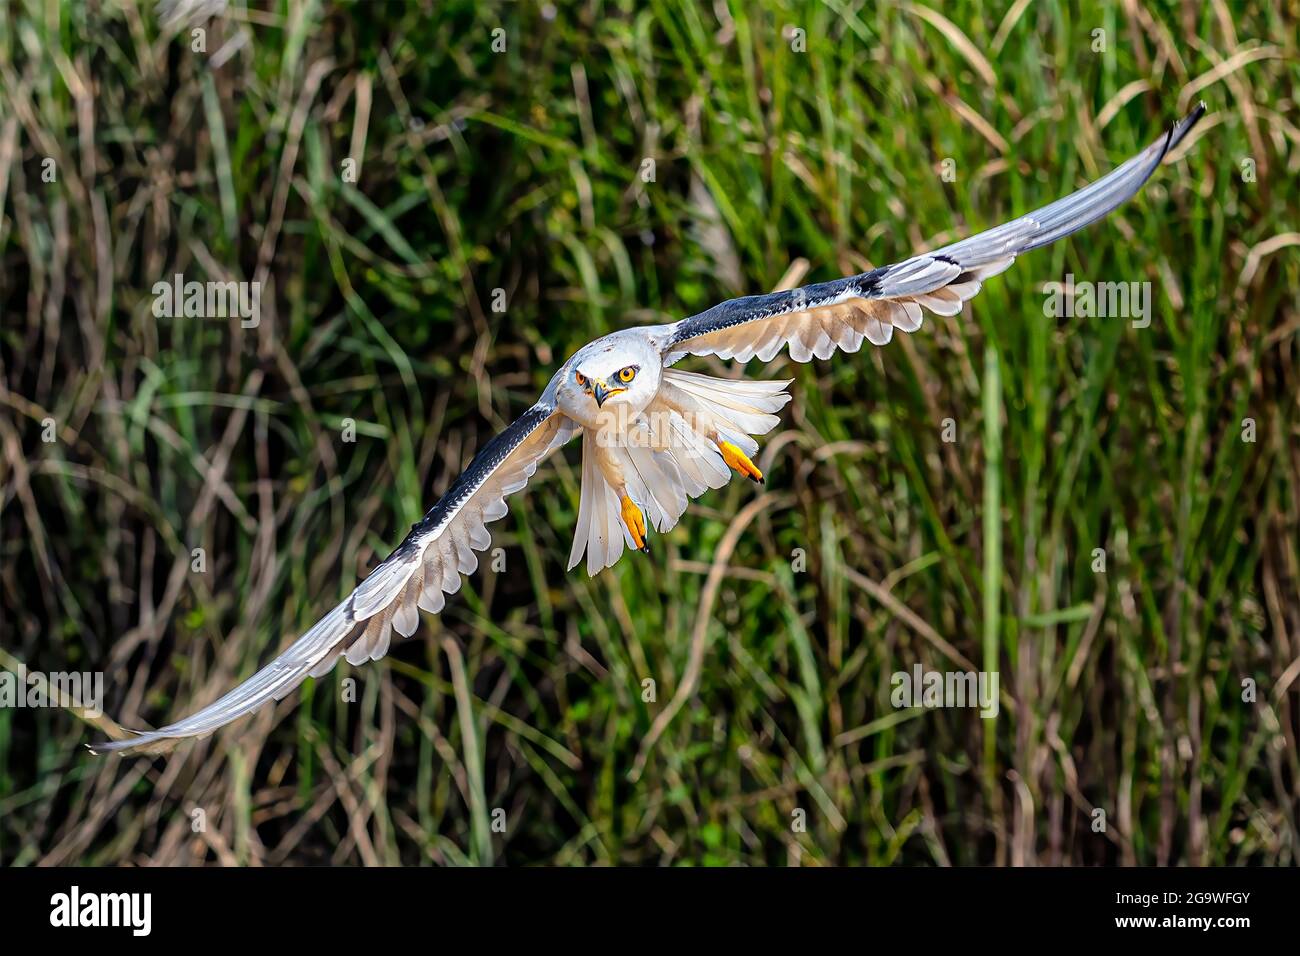 This white eagle known as Black Winged Kite or Elanus Caeruleus (scientific name) is flying to grab its prey with tall green weeds as a background. Stock Photo